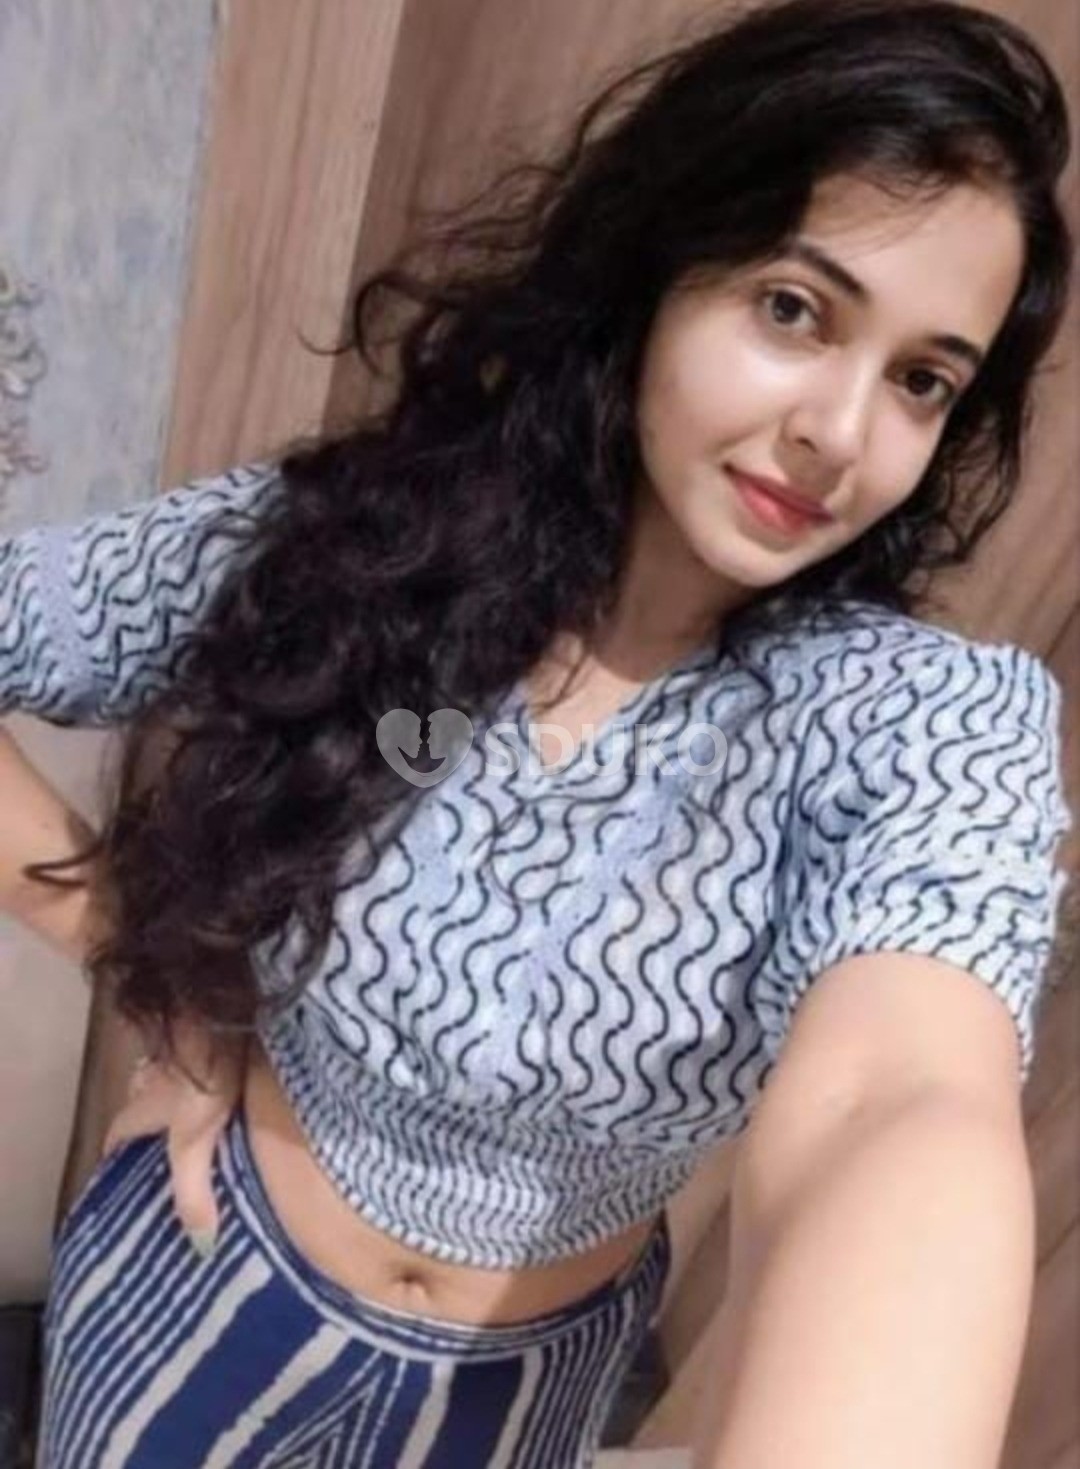 Ranchi LOW PRICE🔸✅k ( 24×7 ) SERVICE A AVAILABLE 100% SAFE AND S SECURE UNLIMITED ENJOY HOT COLLEGE GIRL HOUSEWIFE